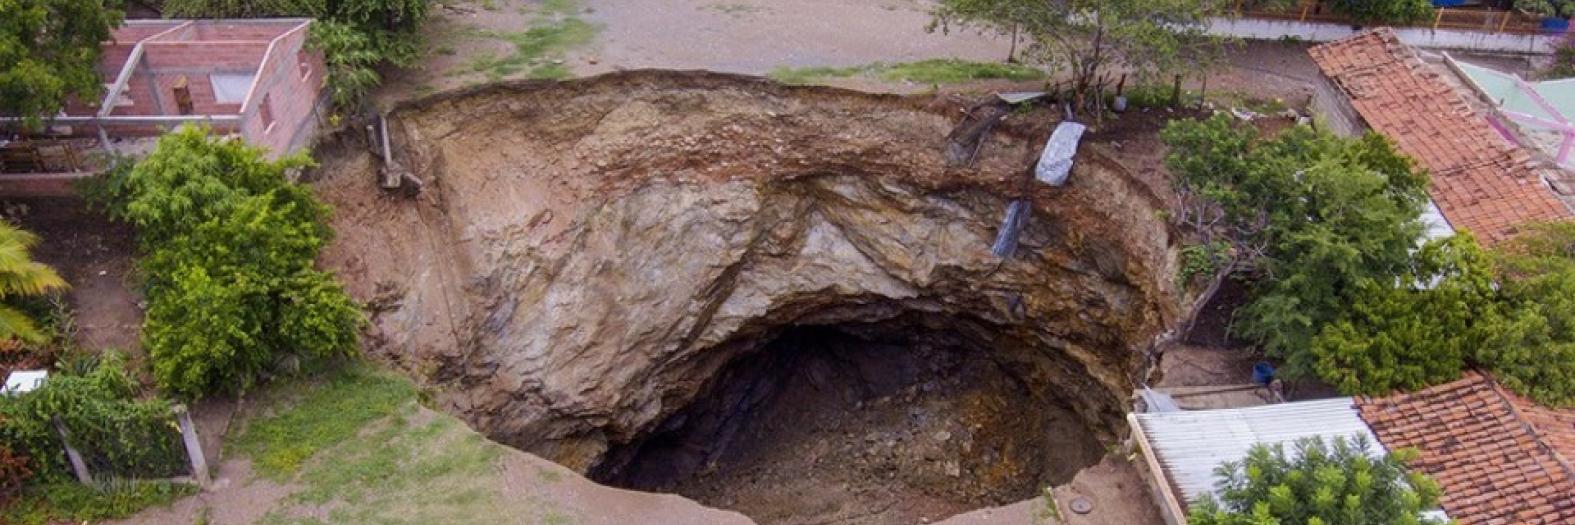 an image of a sinkhole